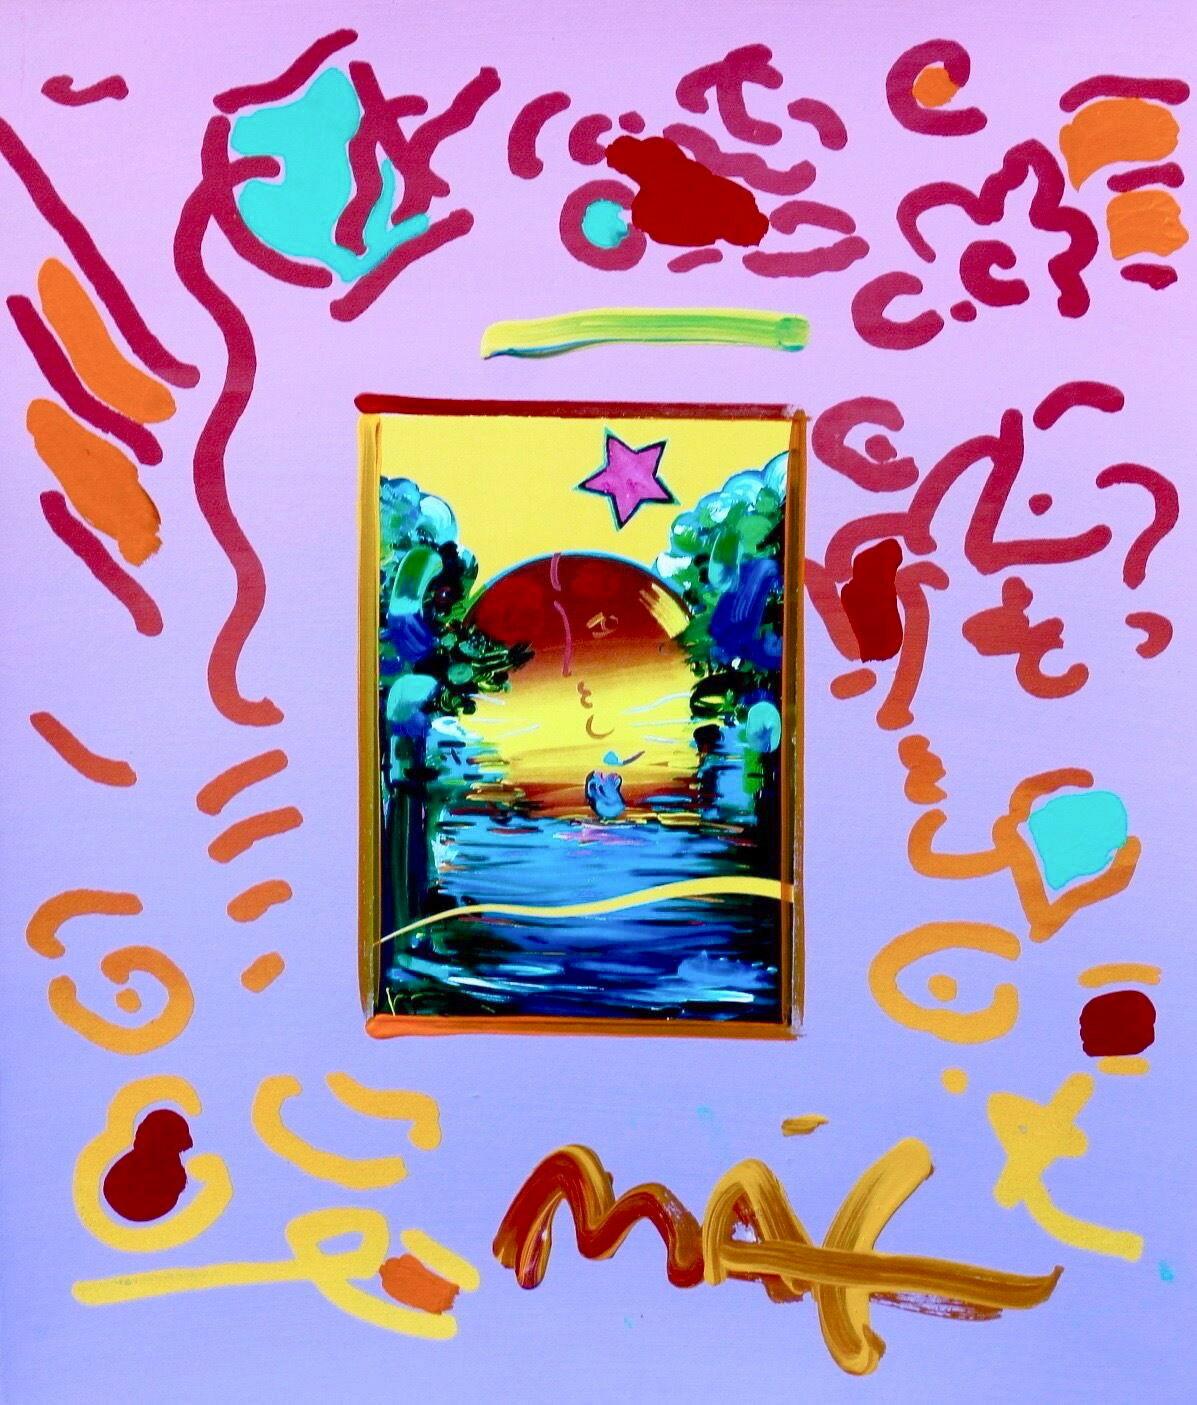 Artist: Peter Max (1937)
Title: Better World
Year: 1998
Medium: Lithograph and acrylic on Arches paper
Size: 12 x 14 inches
Condition: Excellent
Inscription: Signed and by the artist.

PETER MAX (1937- ) Peter Max has achieved huge success and